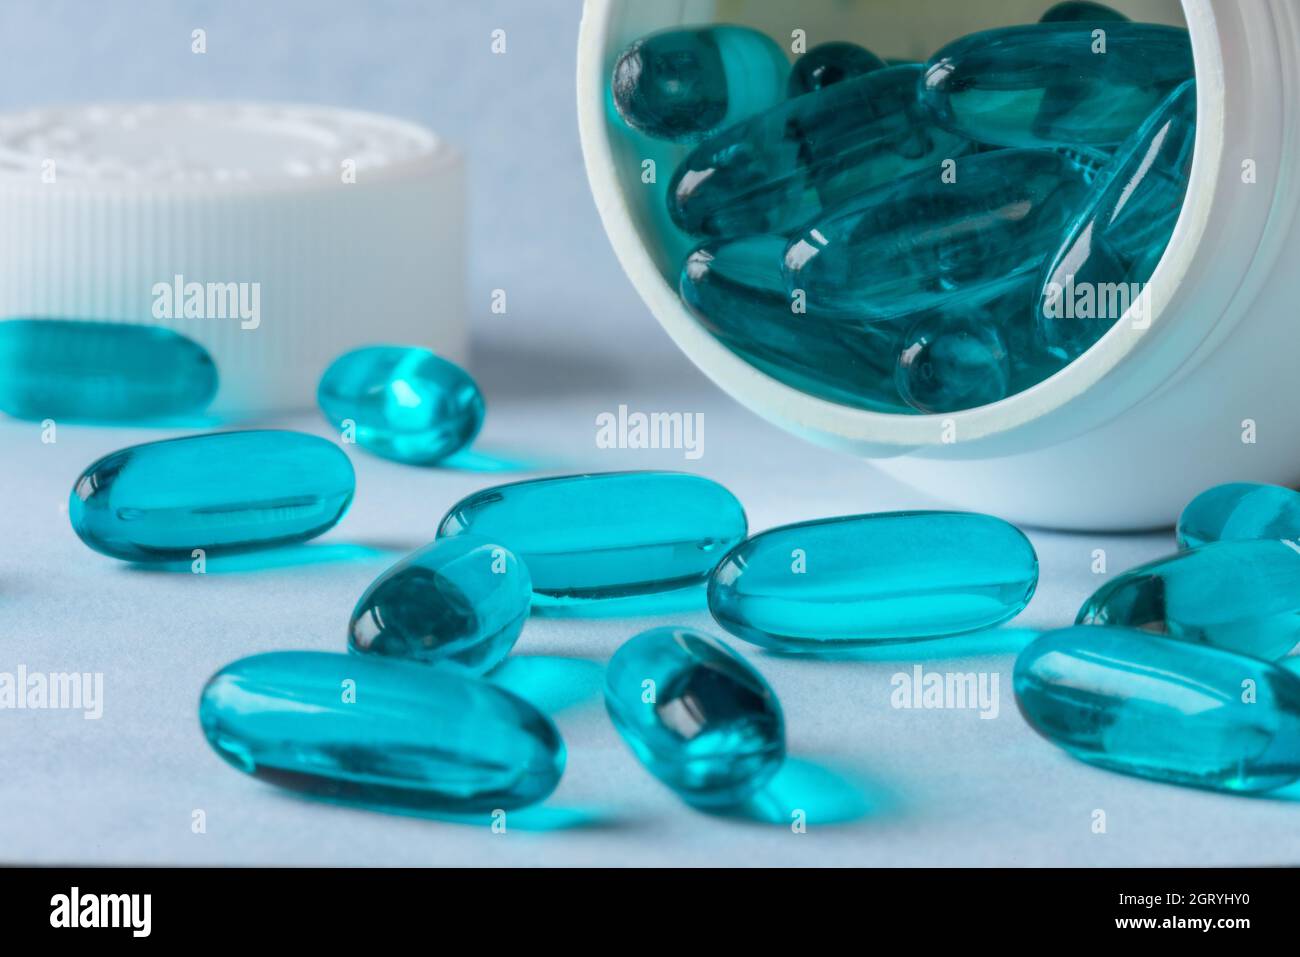 Ibuprofen Gel Capsules Spilled From The Bottle Stock Photo